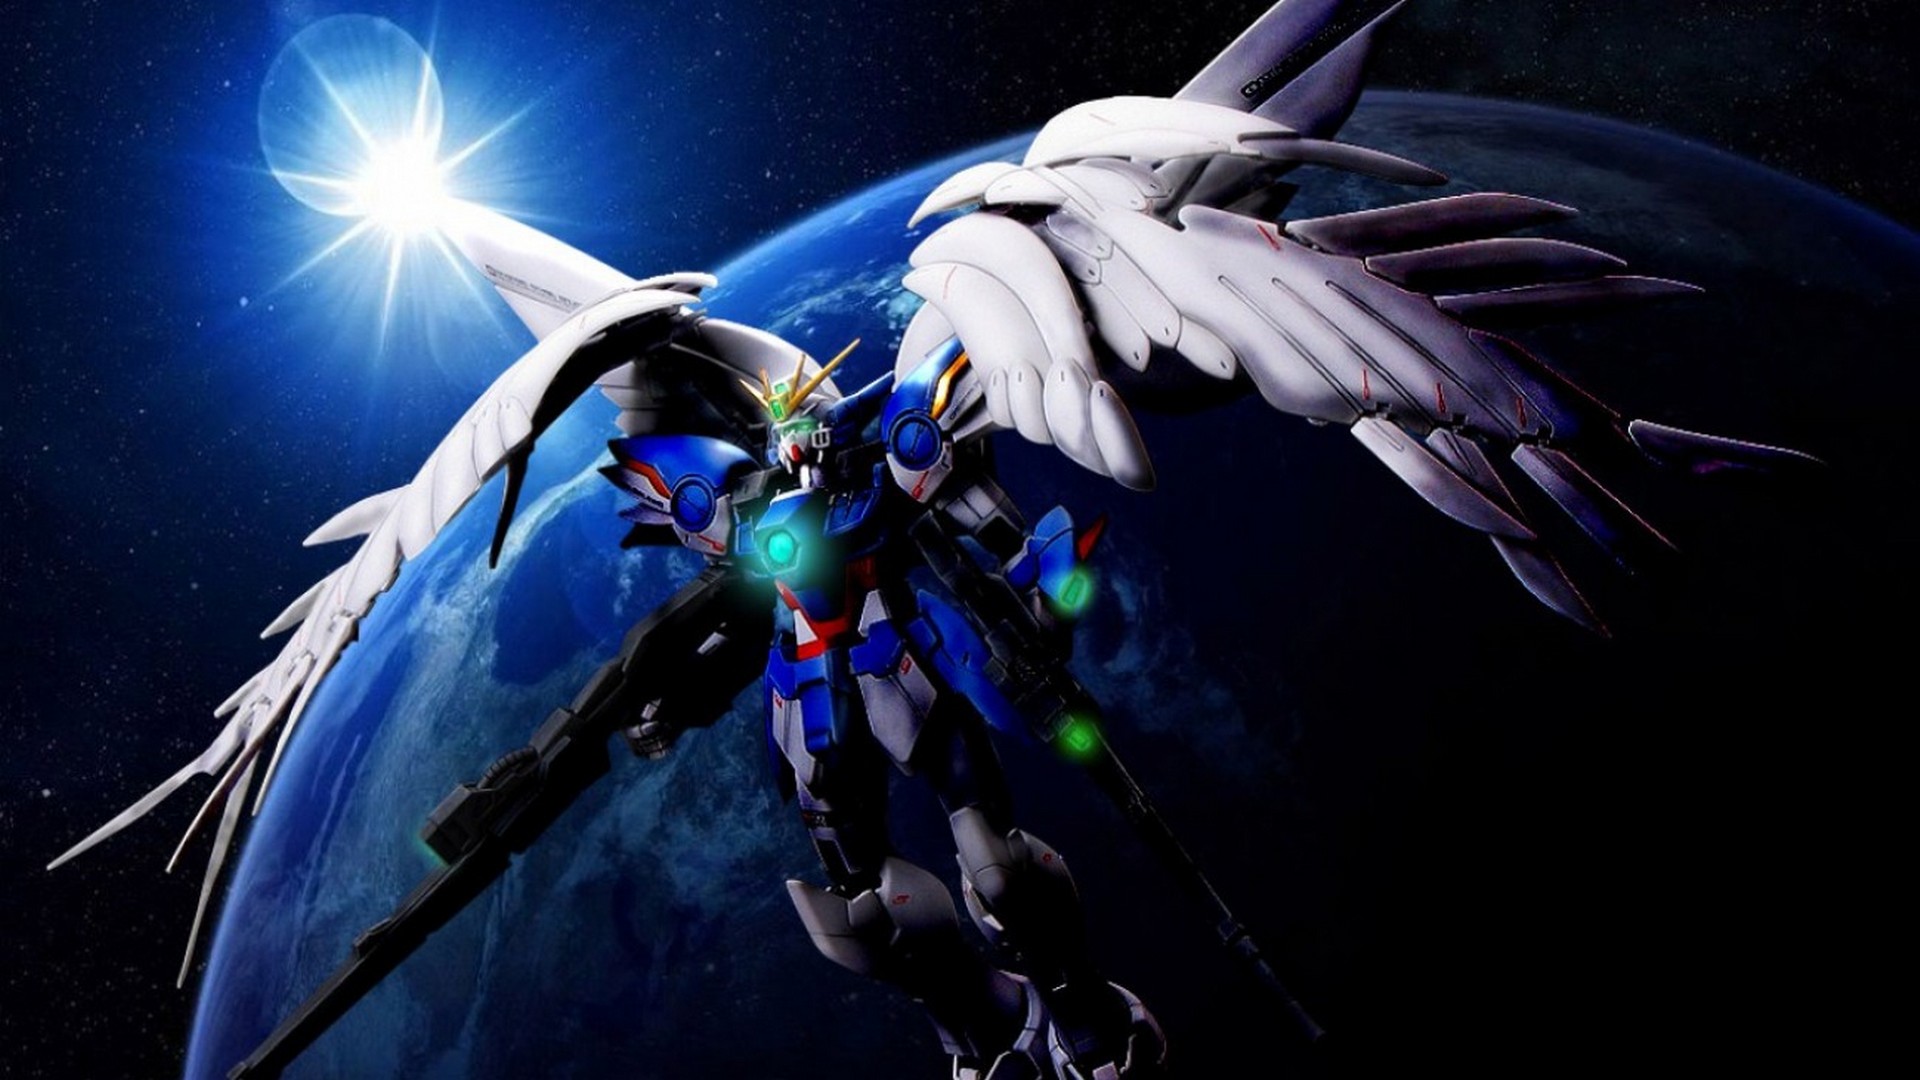 Gundam HD Wallpaper with high-resolution 1920x1080 pixel. You can use this wallpaper for your Desktop Computer Backgrounds, Mac Wallpapers, Android Lock screen or iPhone Screensavers and another smartphone device